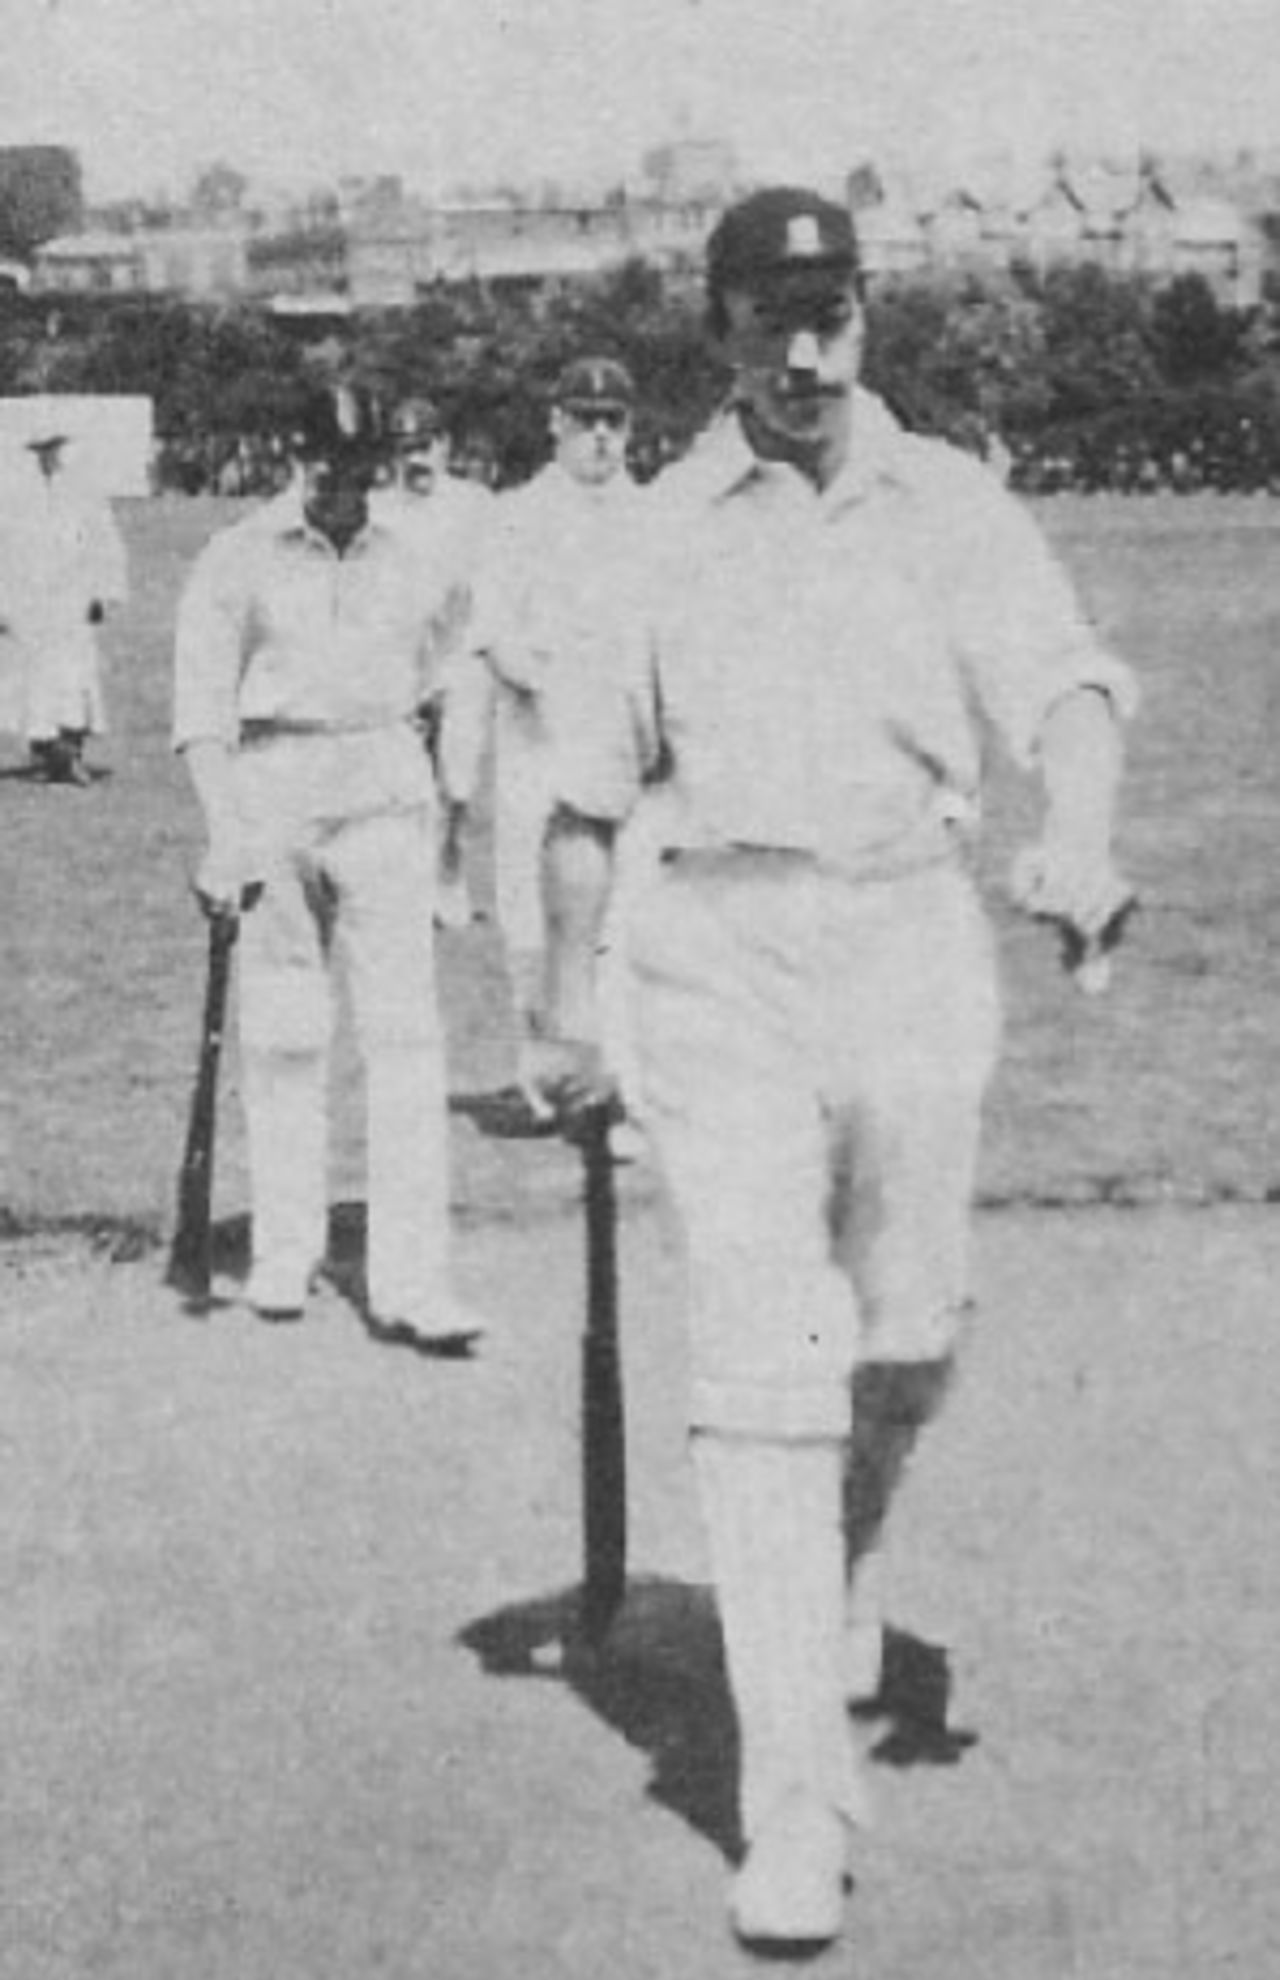 Peter Perrin returns after his 343 not out for Essex at Chesterfield in 1904